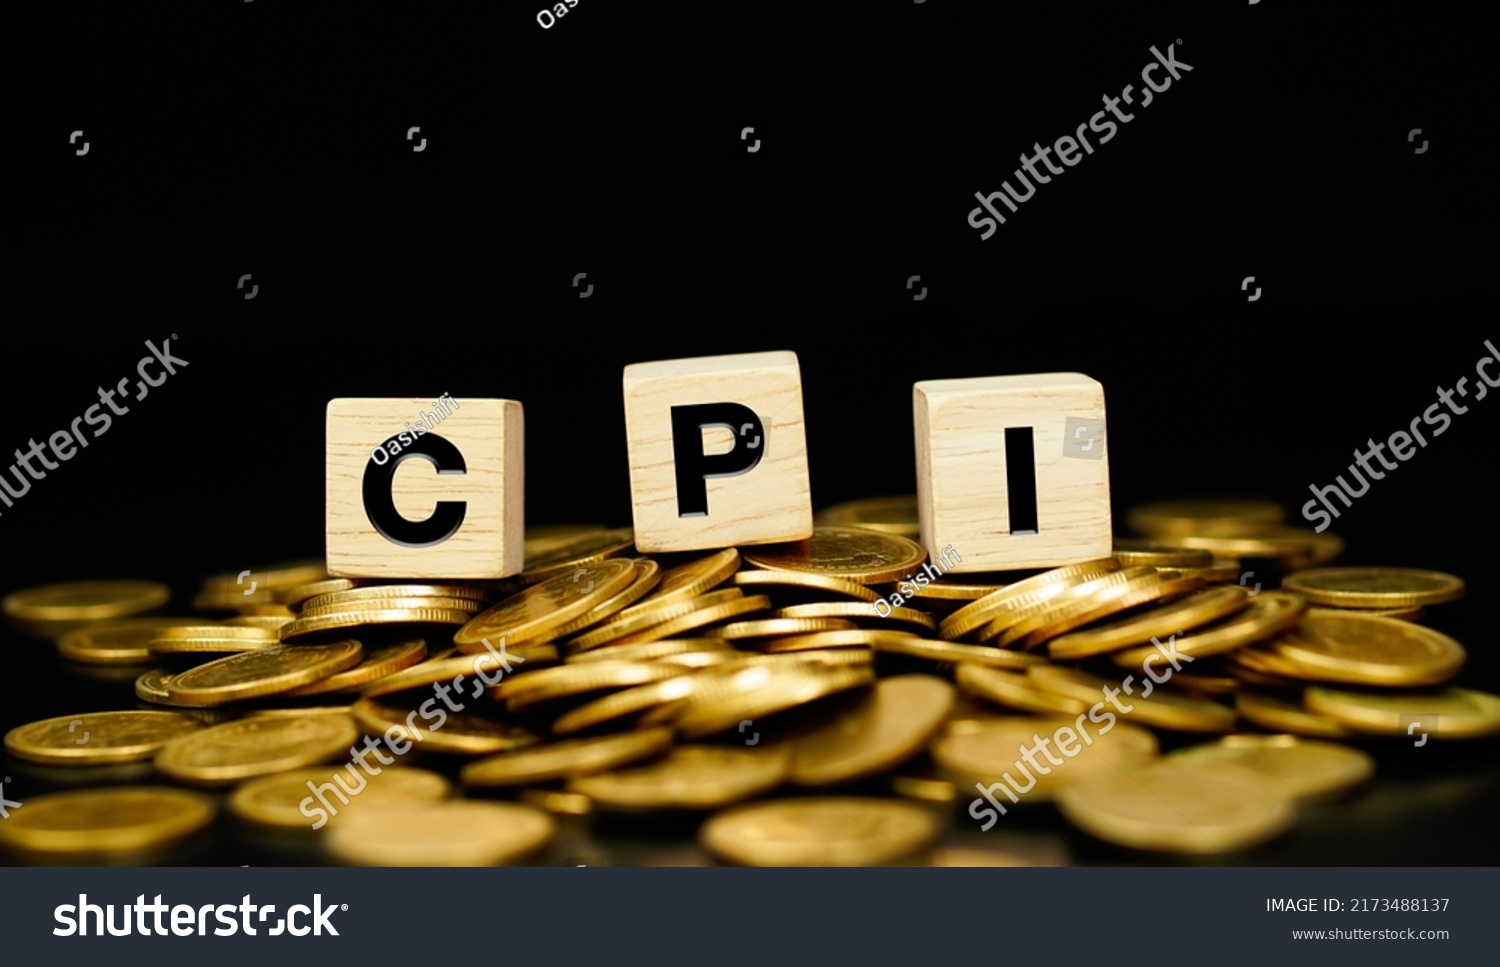 CPI, Stacks of gold coins with the letters CPI (Consumer Price Index) on a wooden cube. Business concept. #2173488137